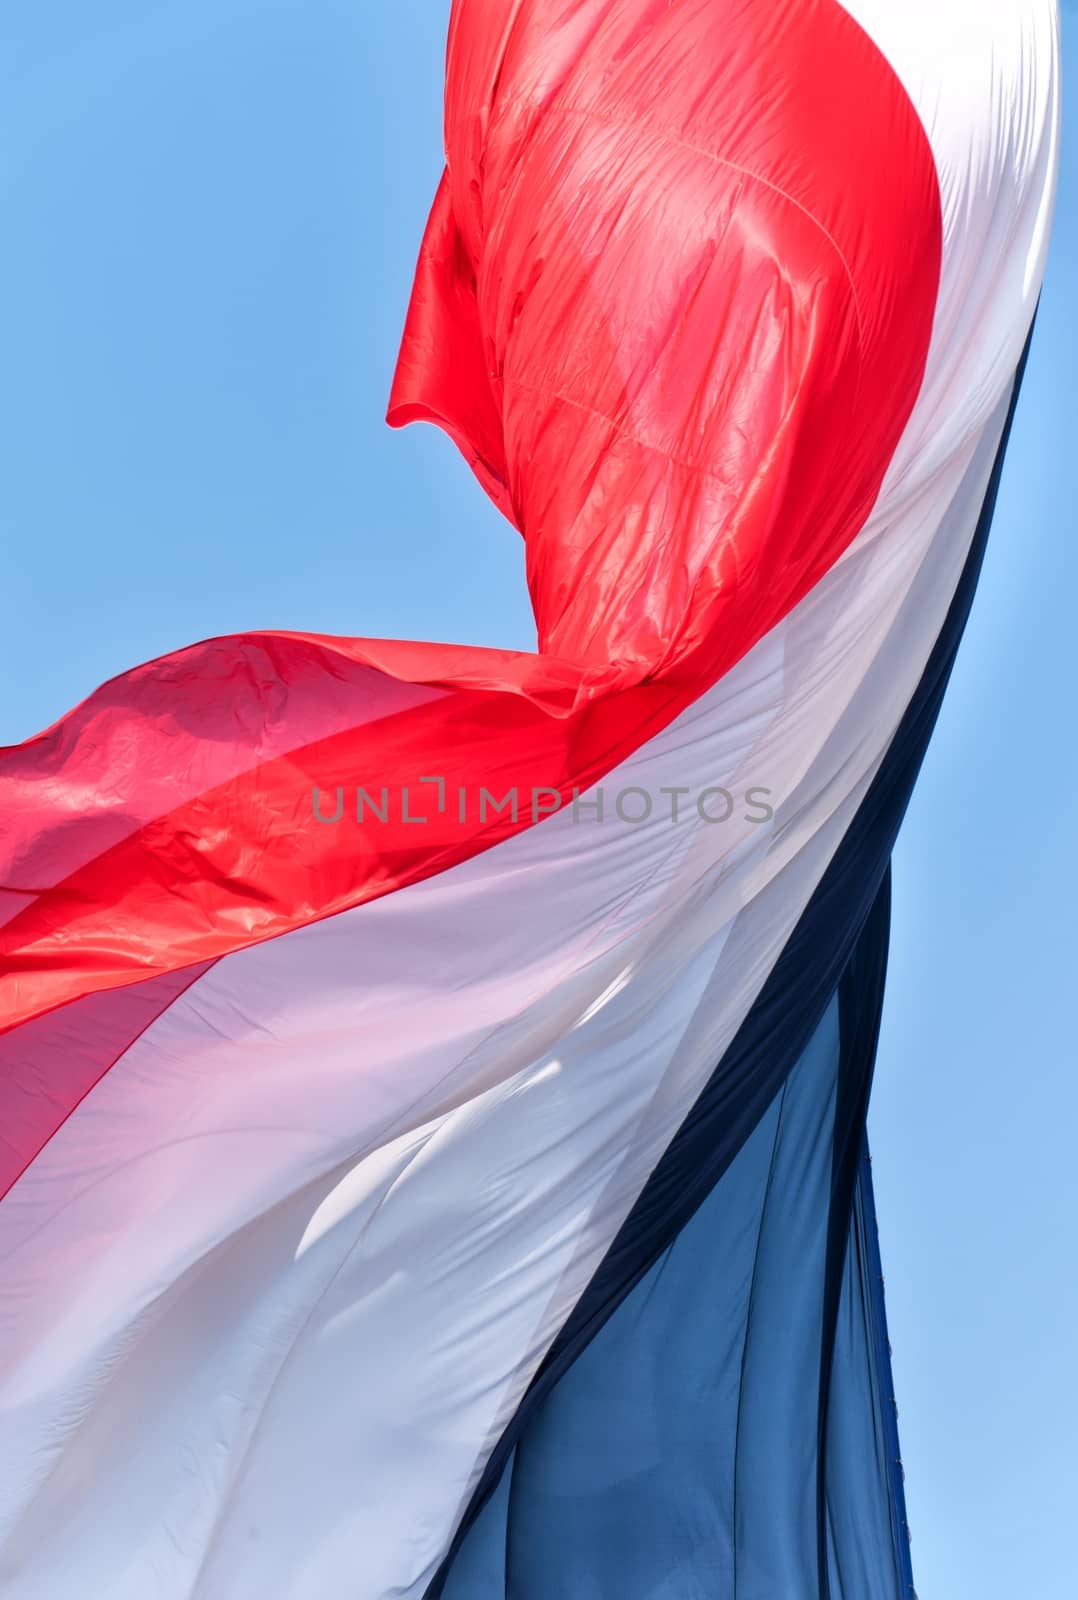 French flag fluttering in the wind by mitakag